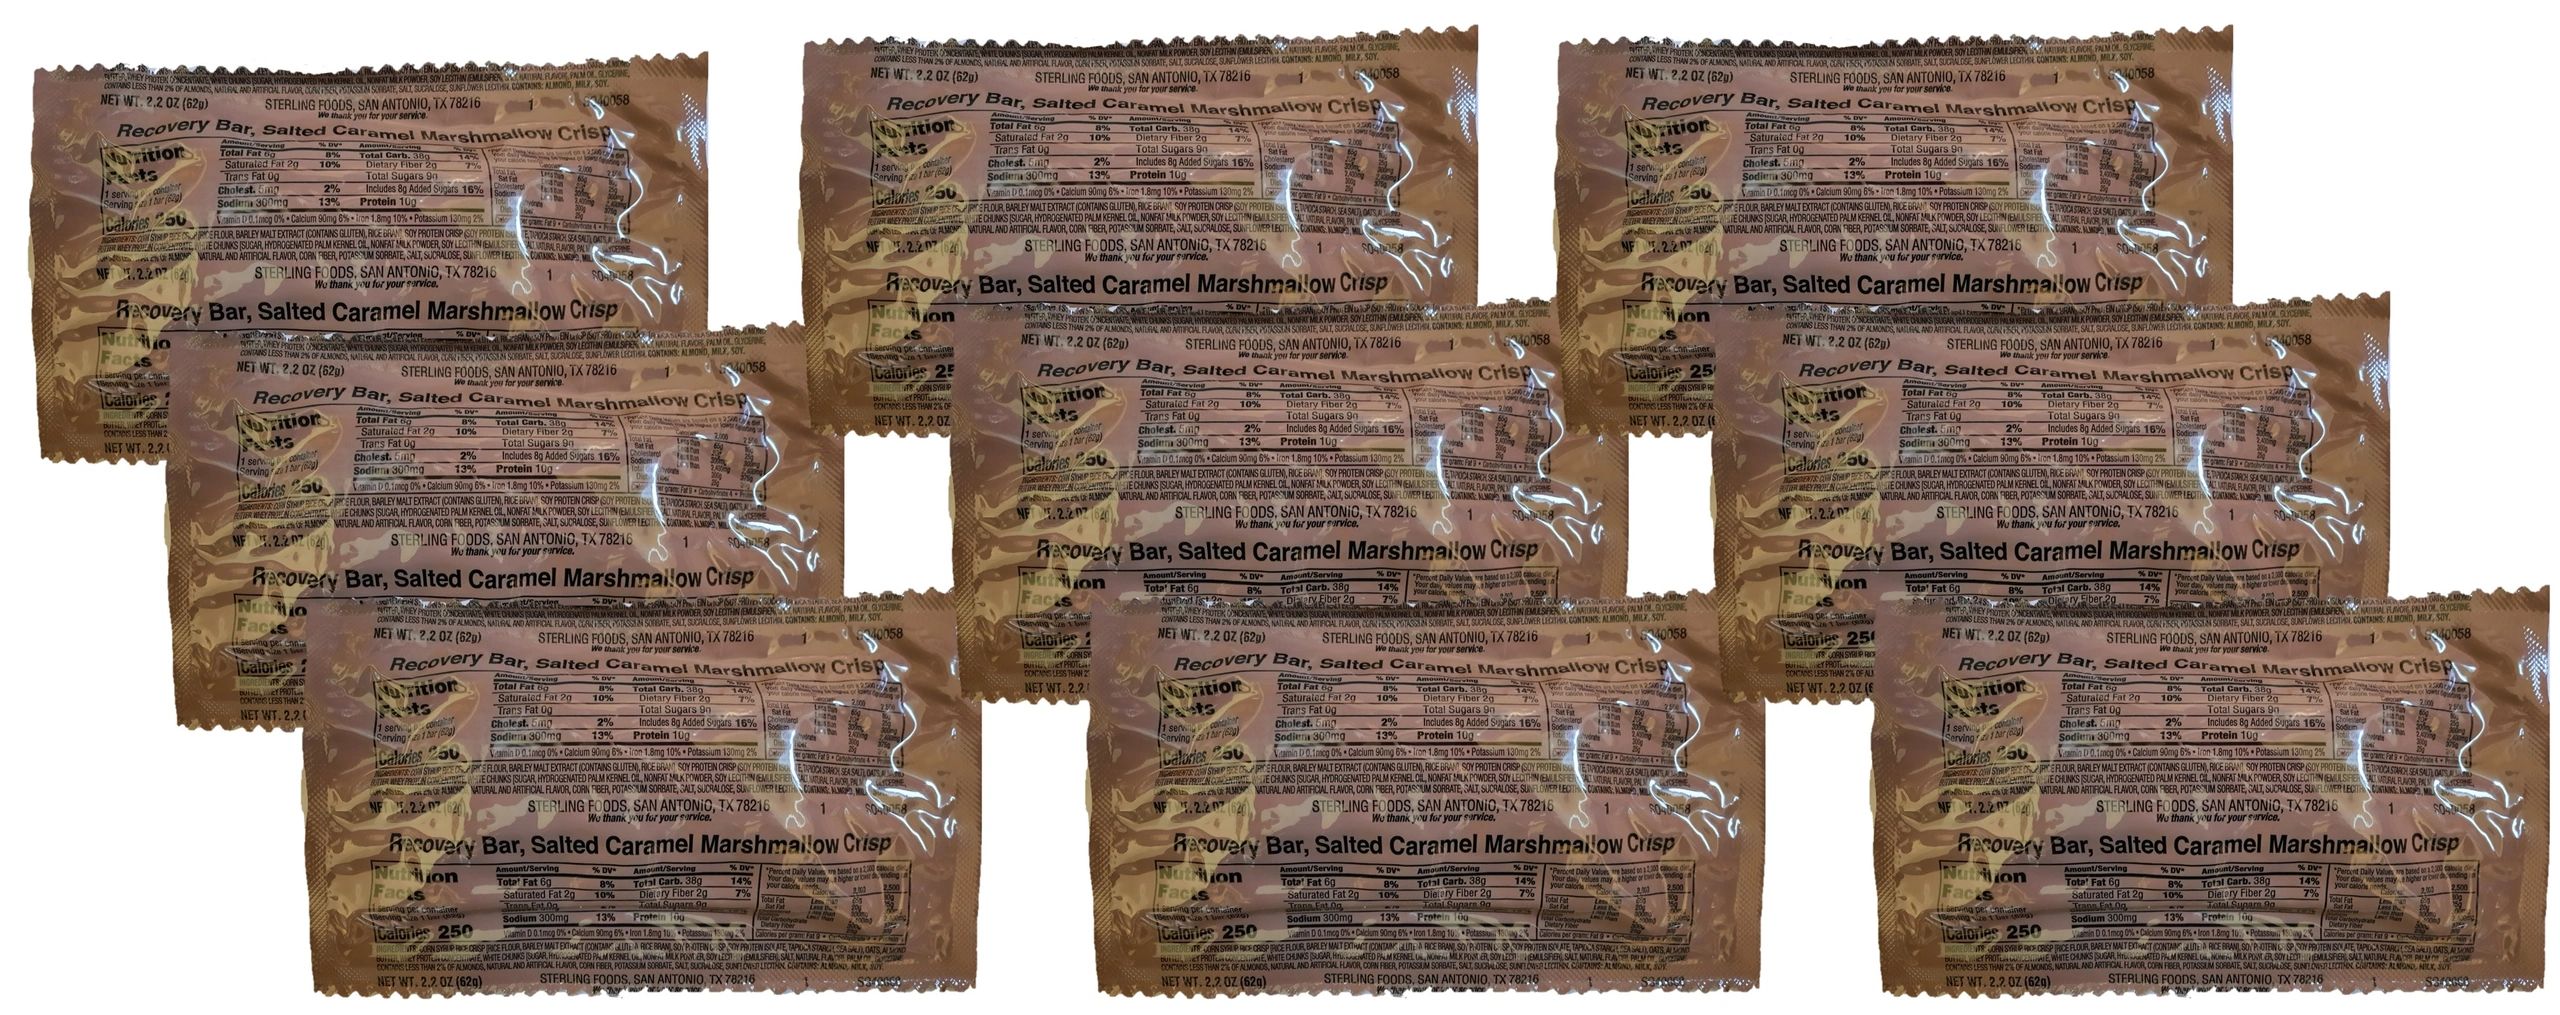 Cheeseburger MRE: FULL 'MEAL, READY TO EAT' - NEW! 1st Insp. '23 - '24